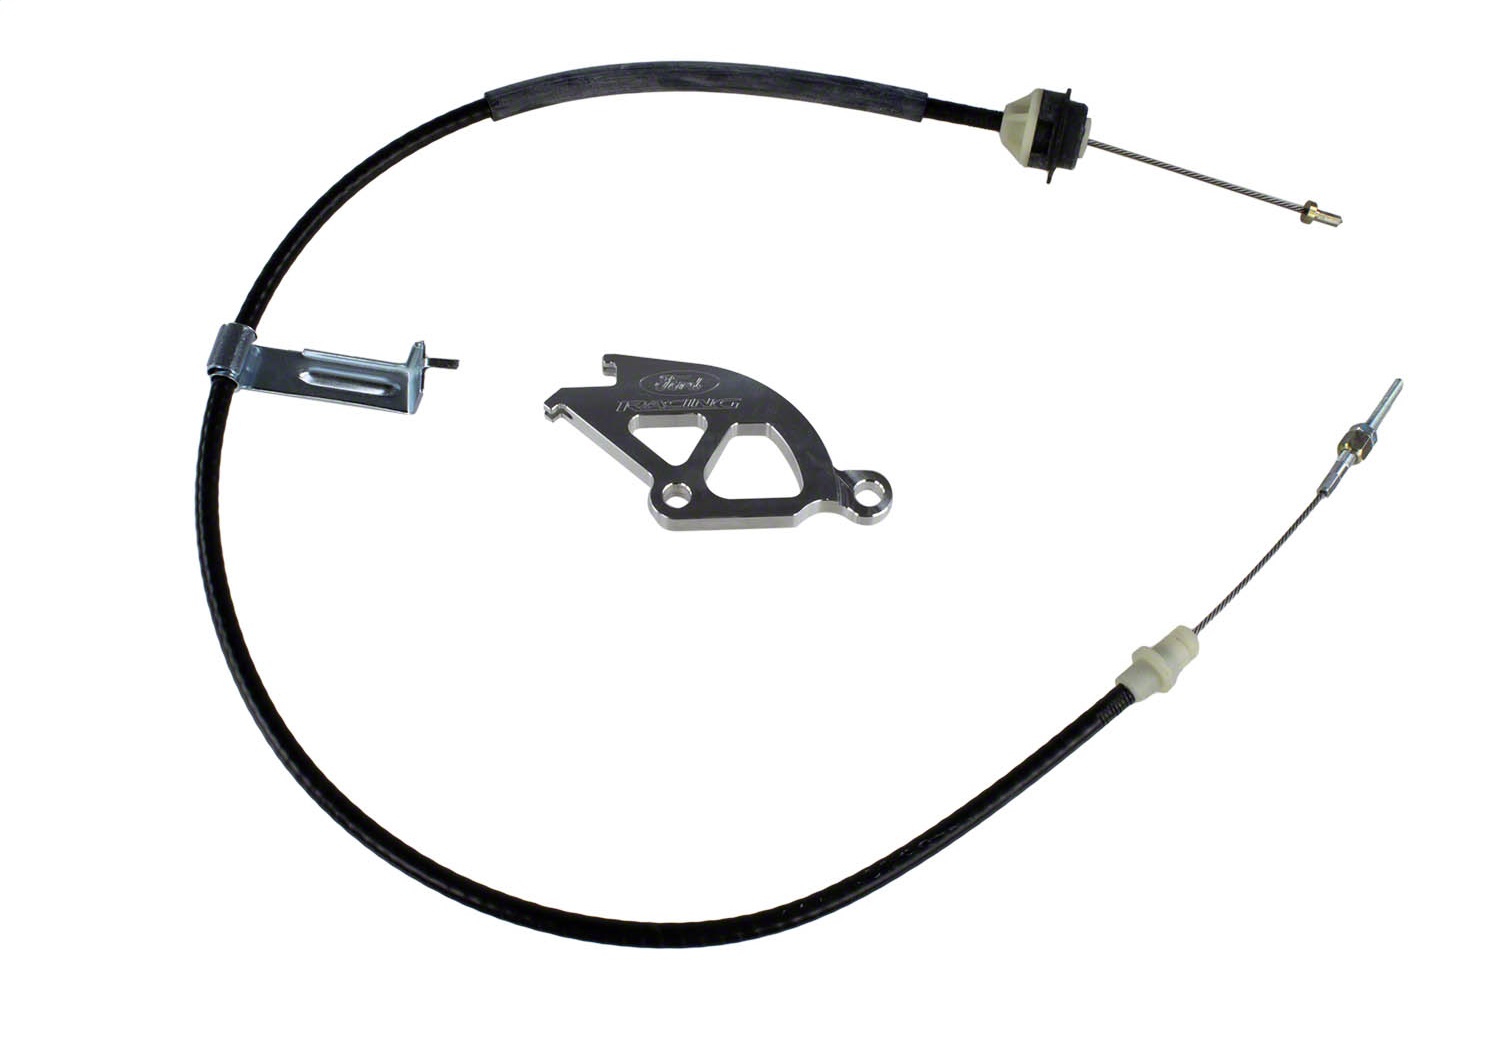 Ford Racing Ford Racing M-7553-B302 Adjustable Clutch Cable Fits 82-95 Capri Mustang